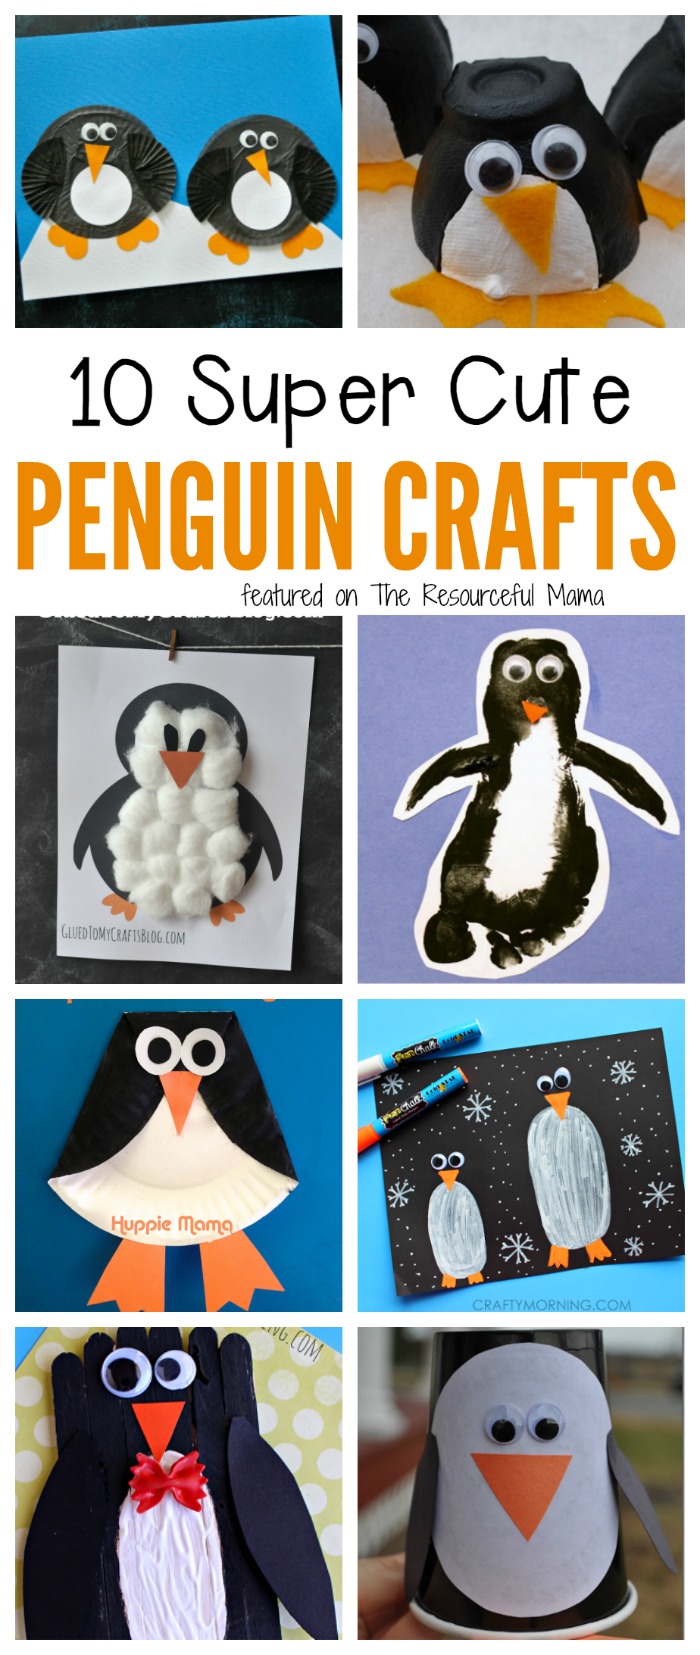  Kids will love making these penguin crafts make from paper rolls, craft sticks, cupcake liners, and more fun craft supplies. 